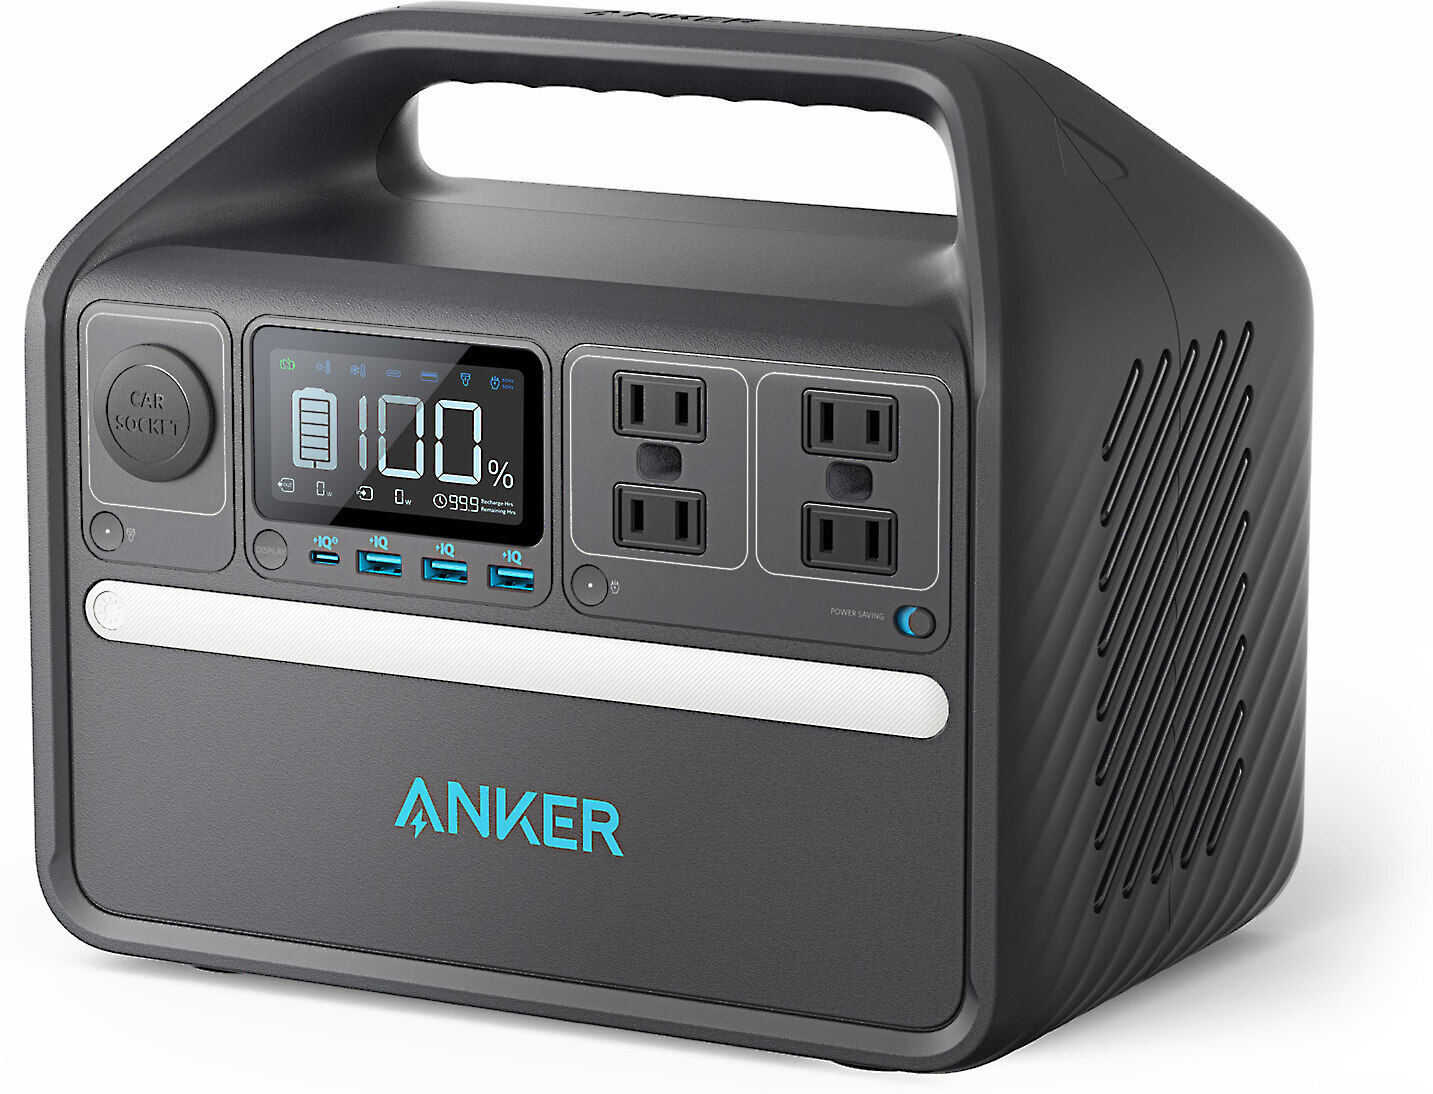 Anker recalls 535 Power Bank amid overheating and fire risk - The